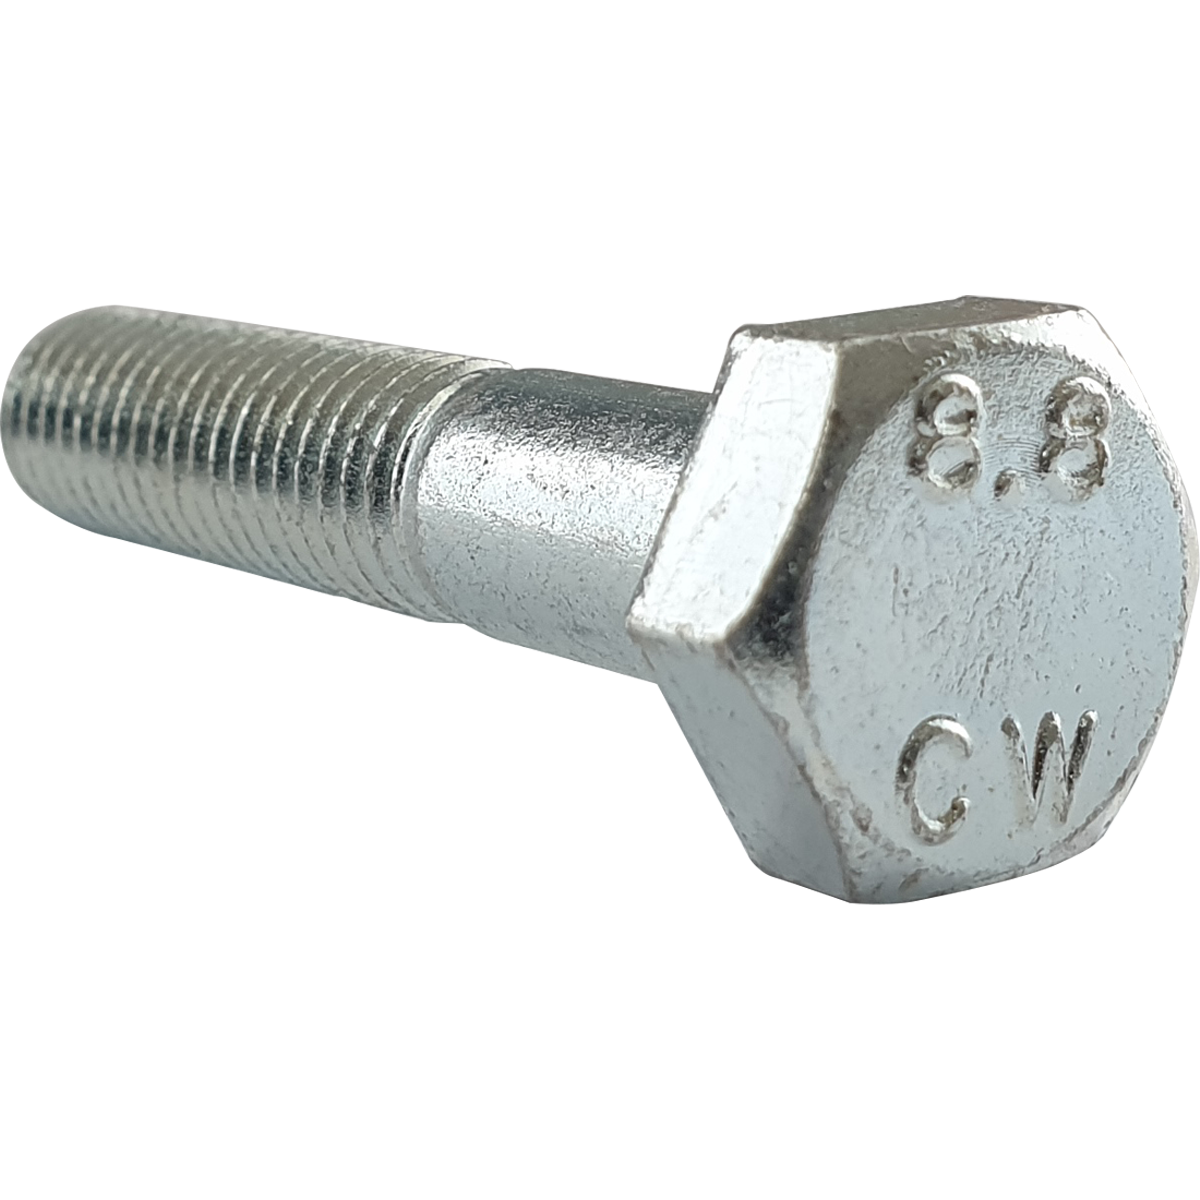 Metric, BZP, part thread hex bolts, also know as hexagon bolts. A part threaded bolt with a hexagonal head.